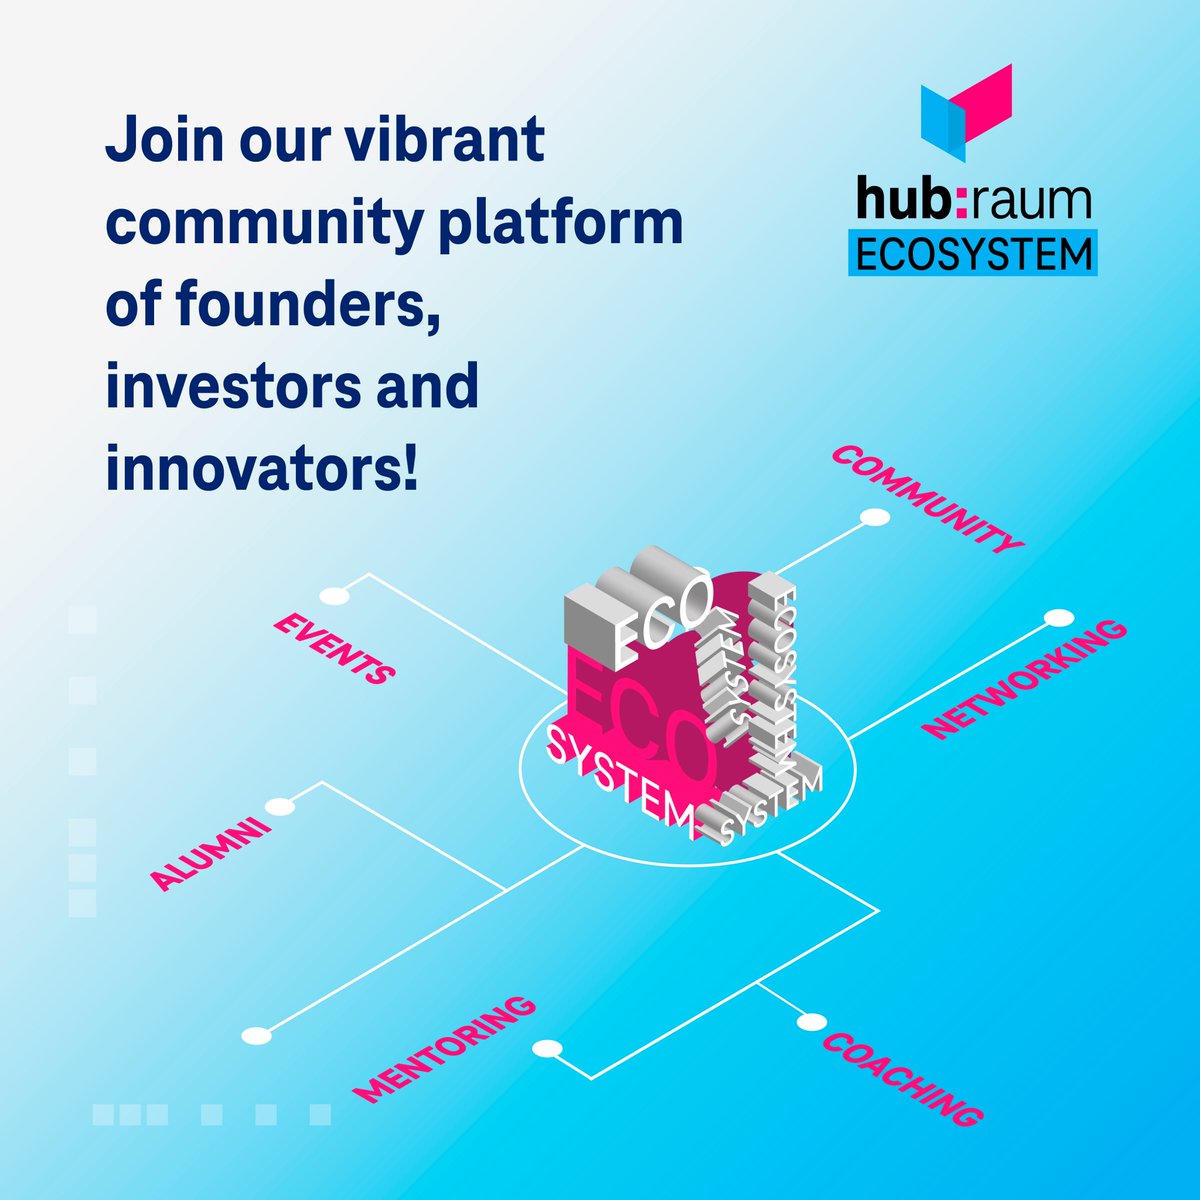 📢 Calling all hubraum program alumni, investees, and #ecosystem collaborators! Join our exclusive community platform to access our latest updates and connect with fellow innovators. Read more & register here: bit.ly/445OKYA